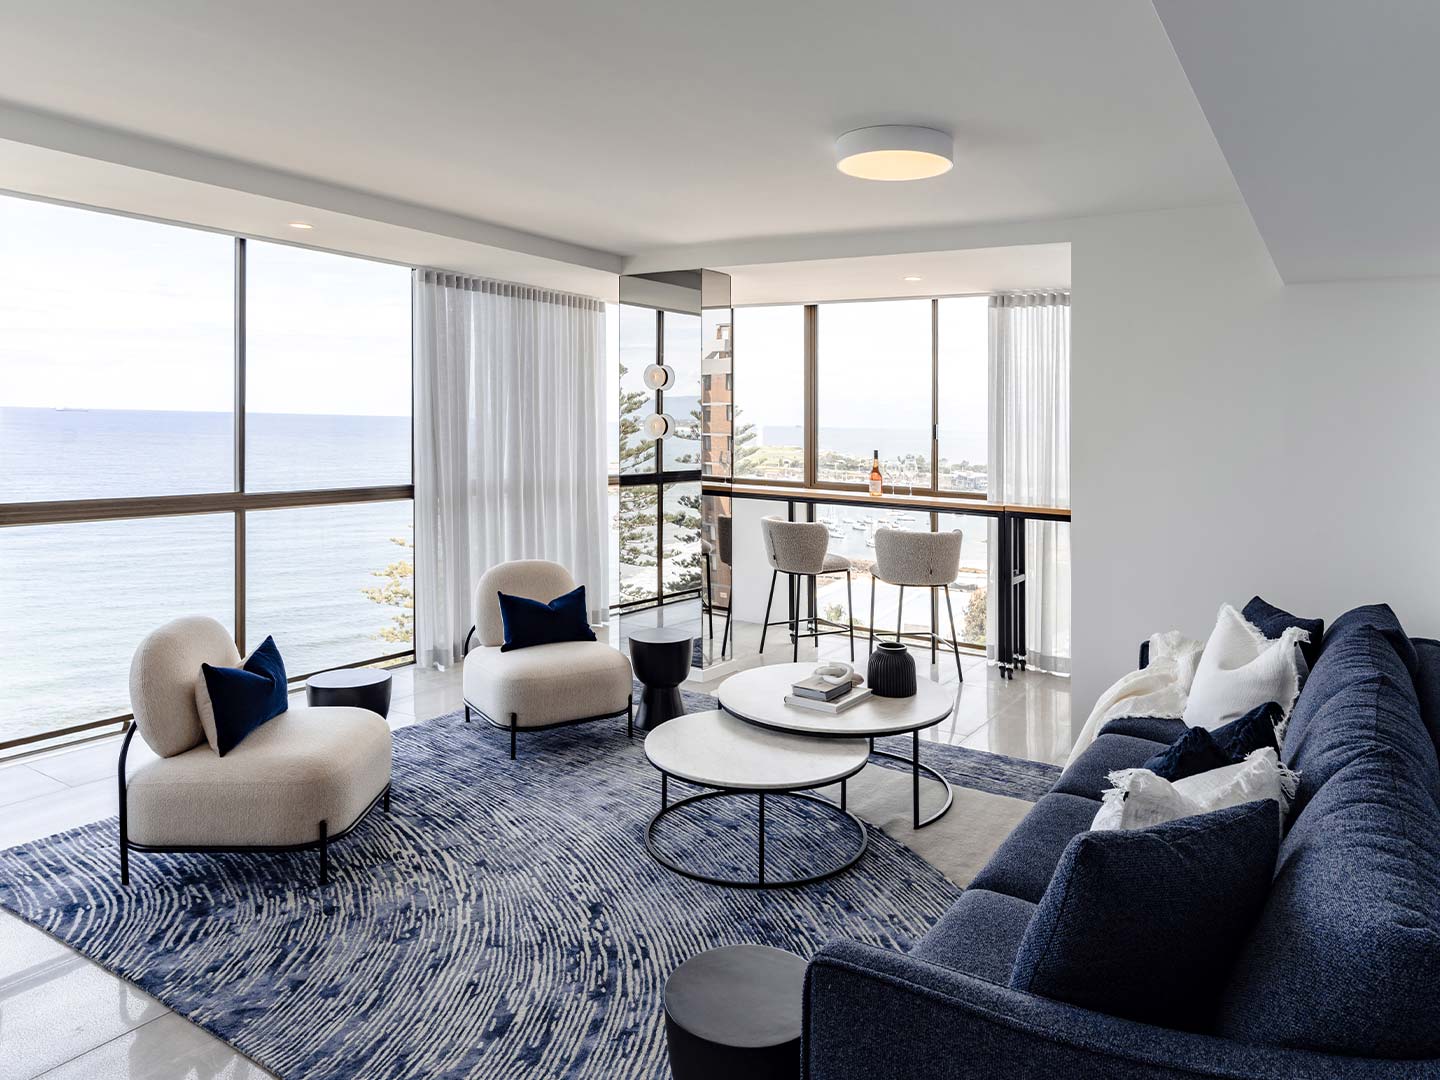 Niagara Rug, featured in the winning Wollongong project